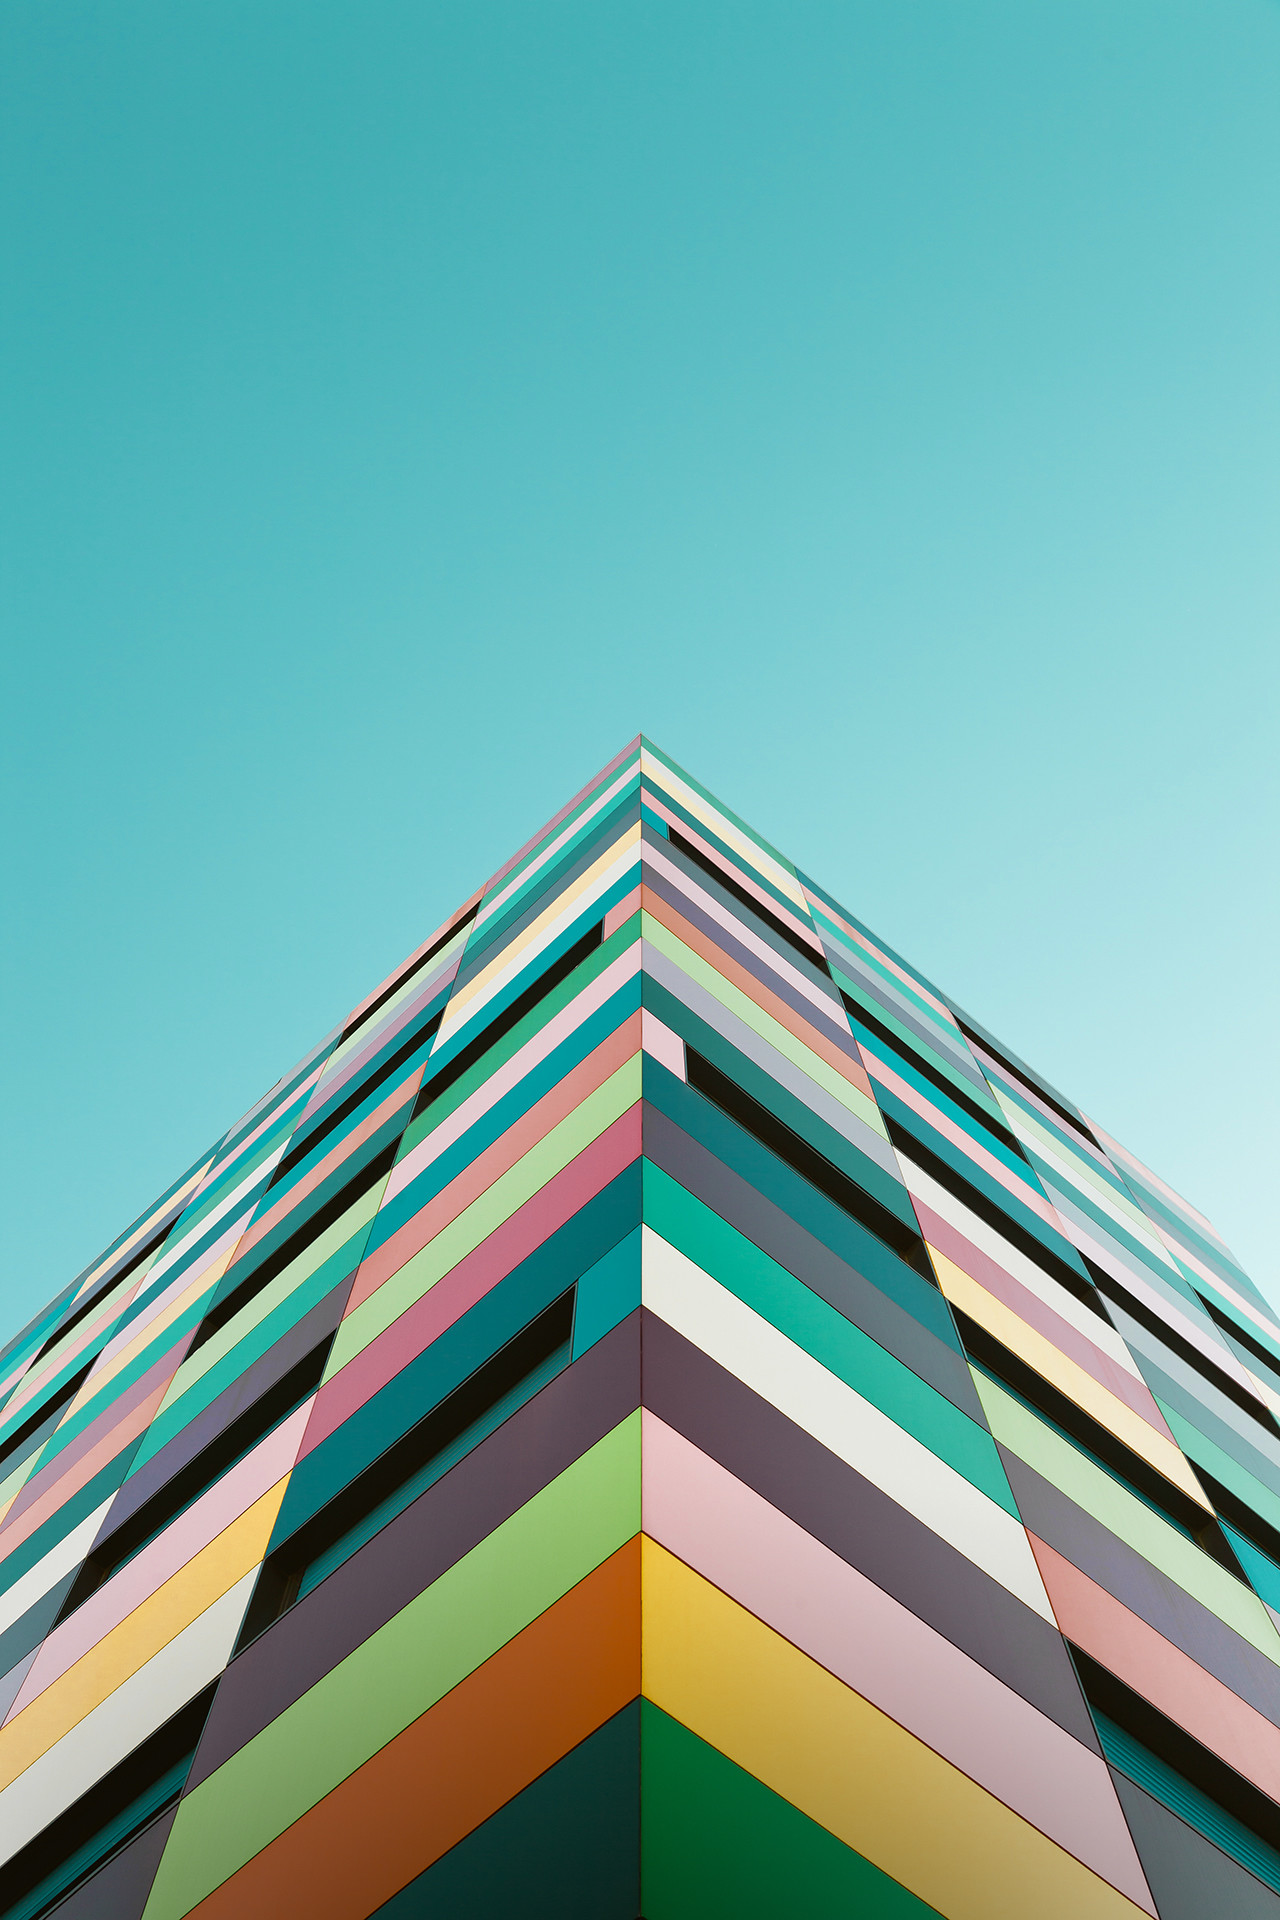 Download the 26 wallpapers that are pre-loaded on the OnePlus 2